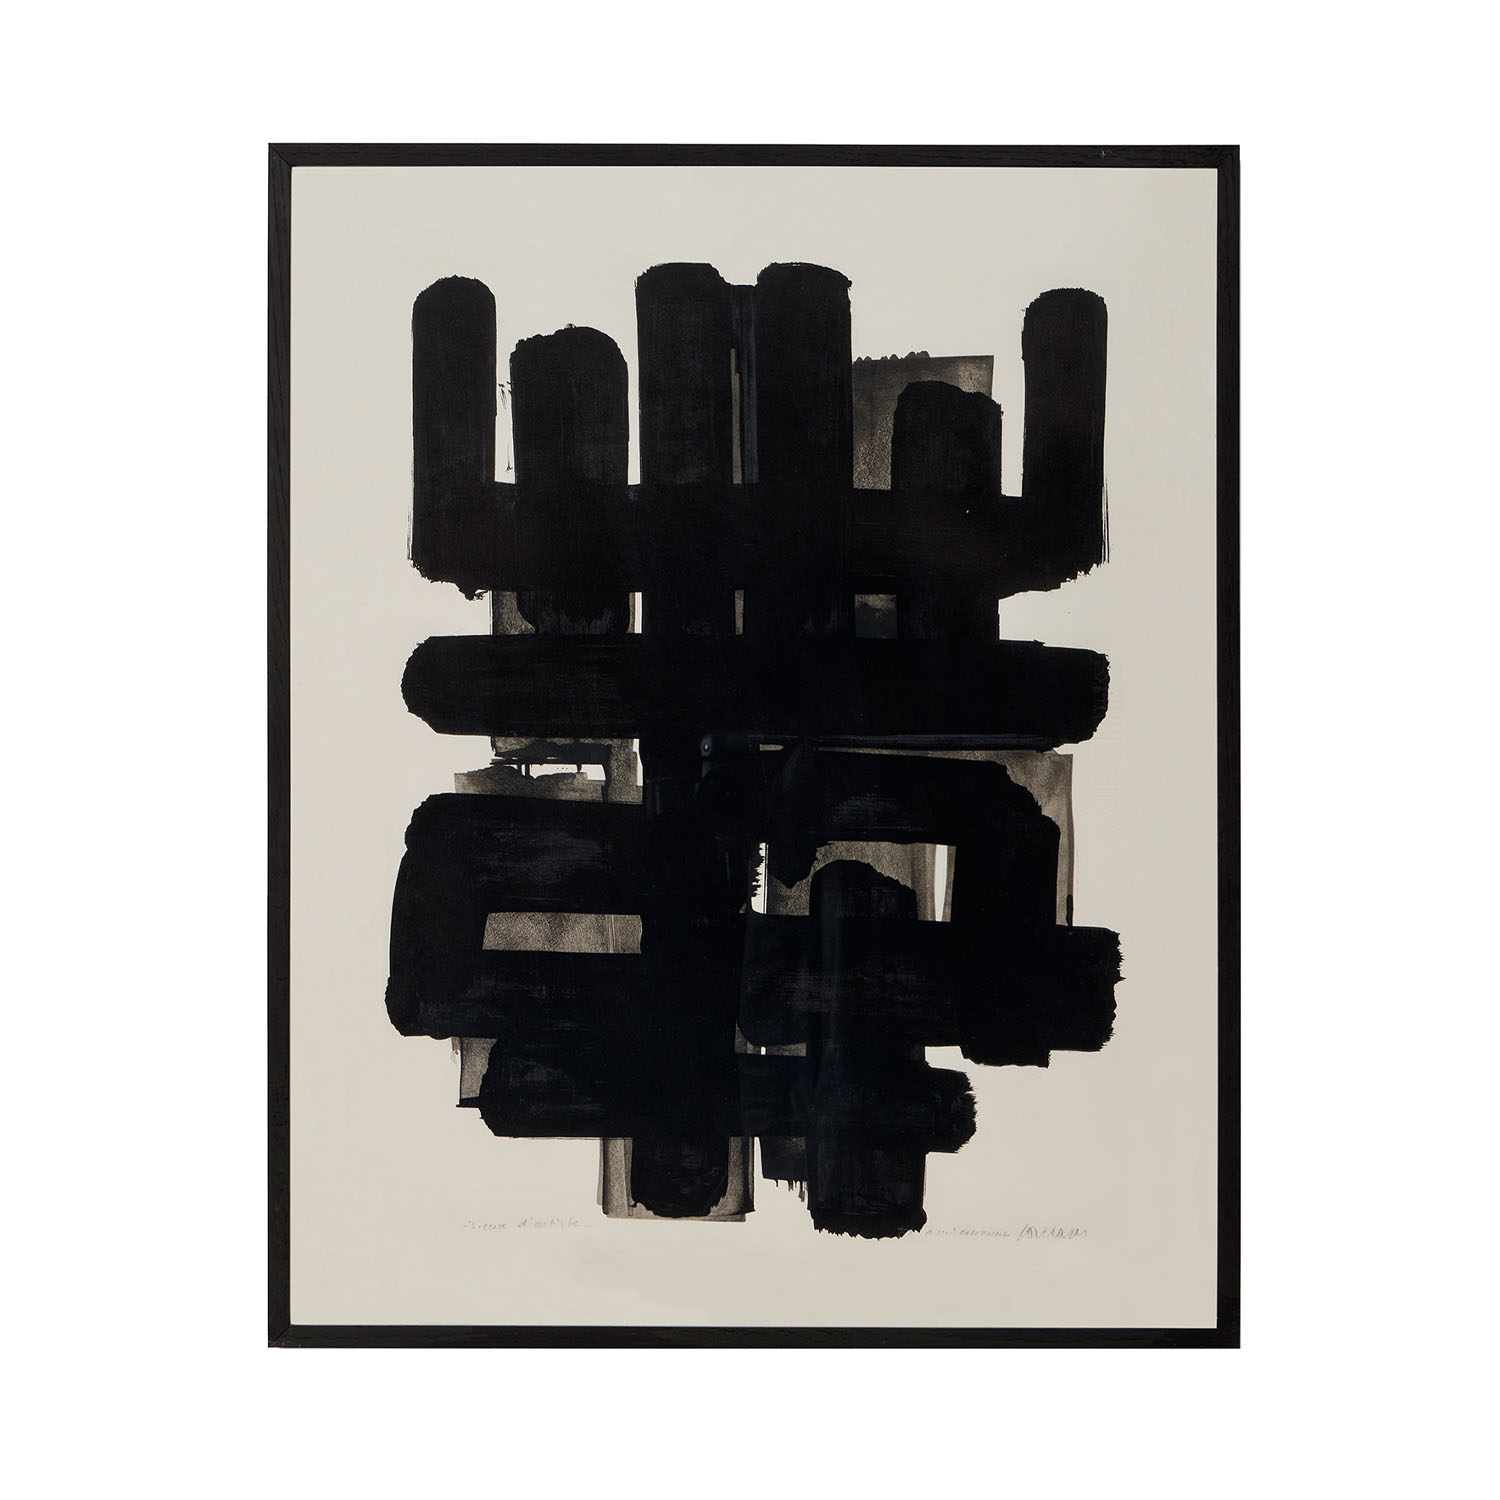 Pierre Soulages, "Lithographie n°3", lithograph in colors on paper, artist proof, signed, dedicated and framed, of 1957 - 00pp